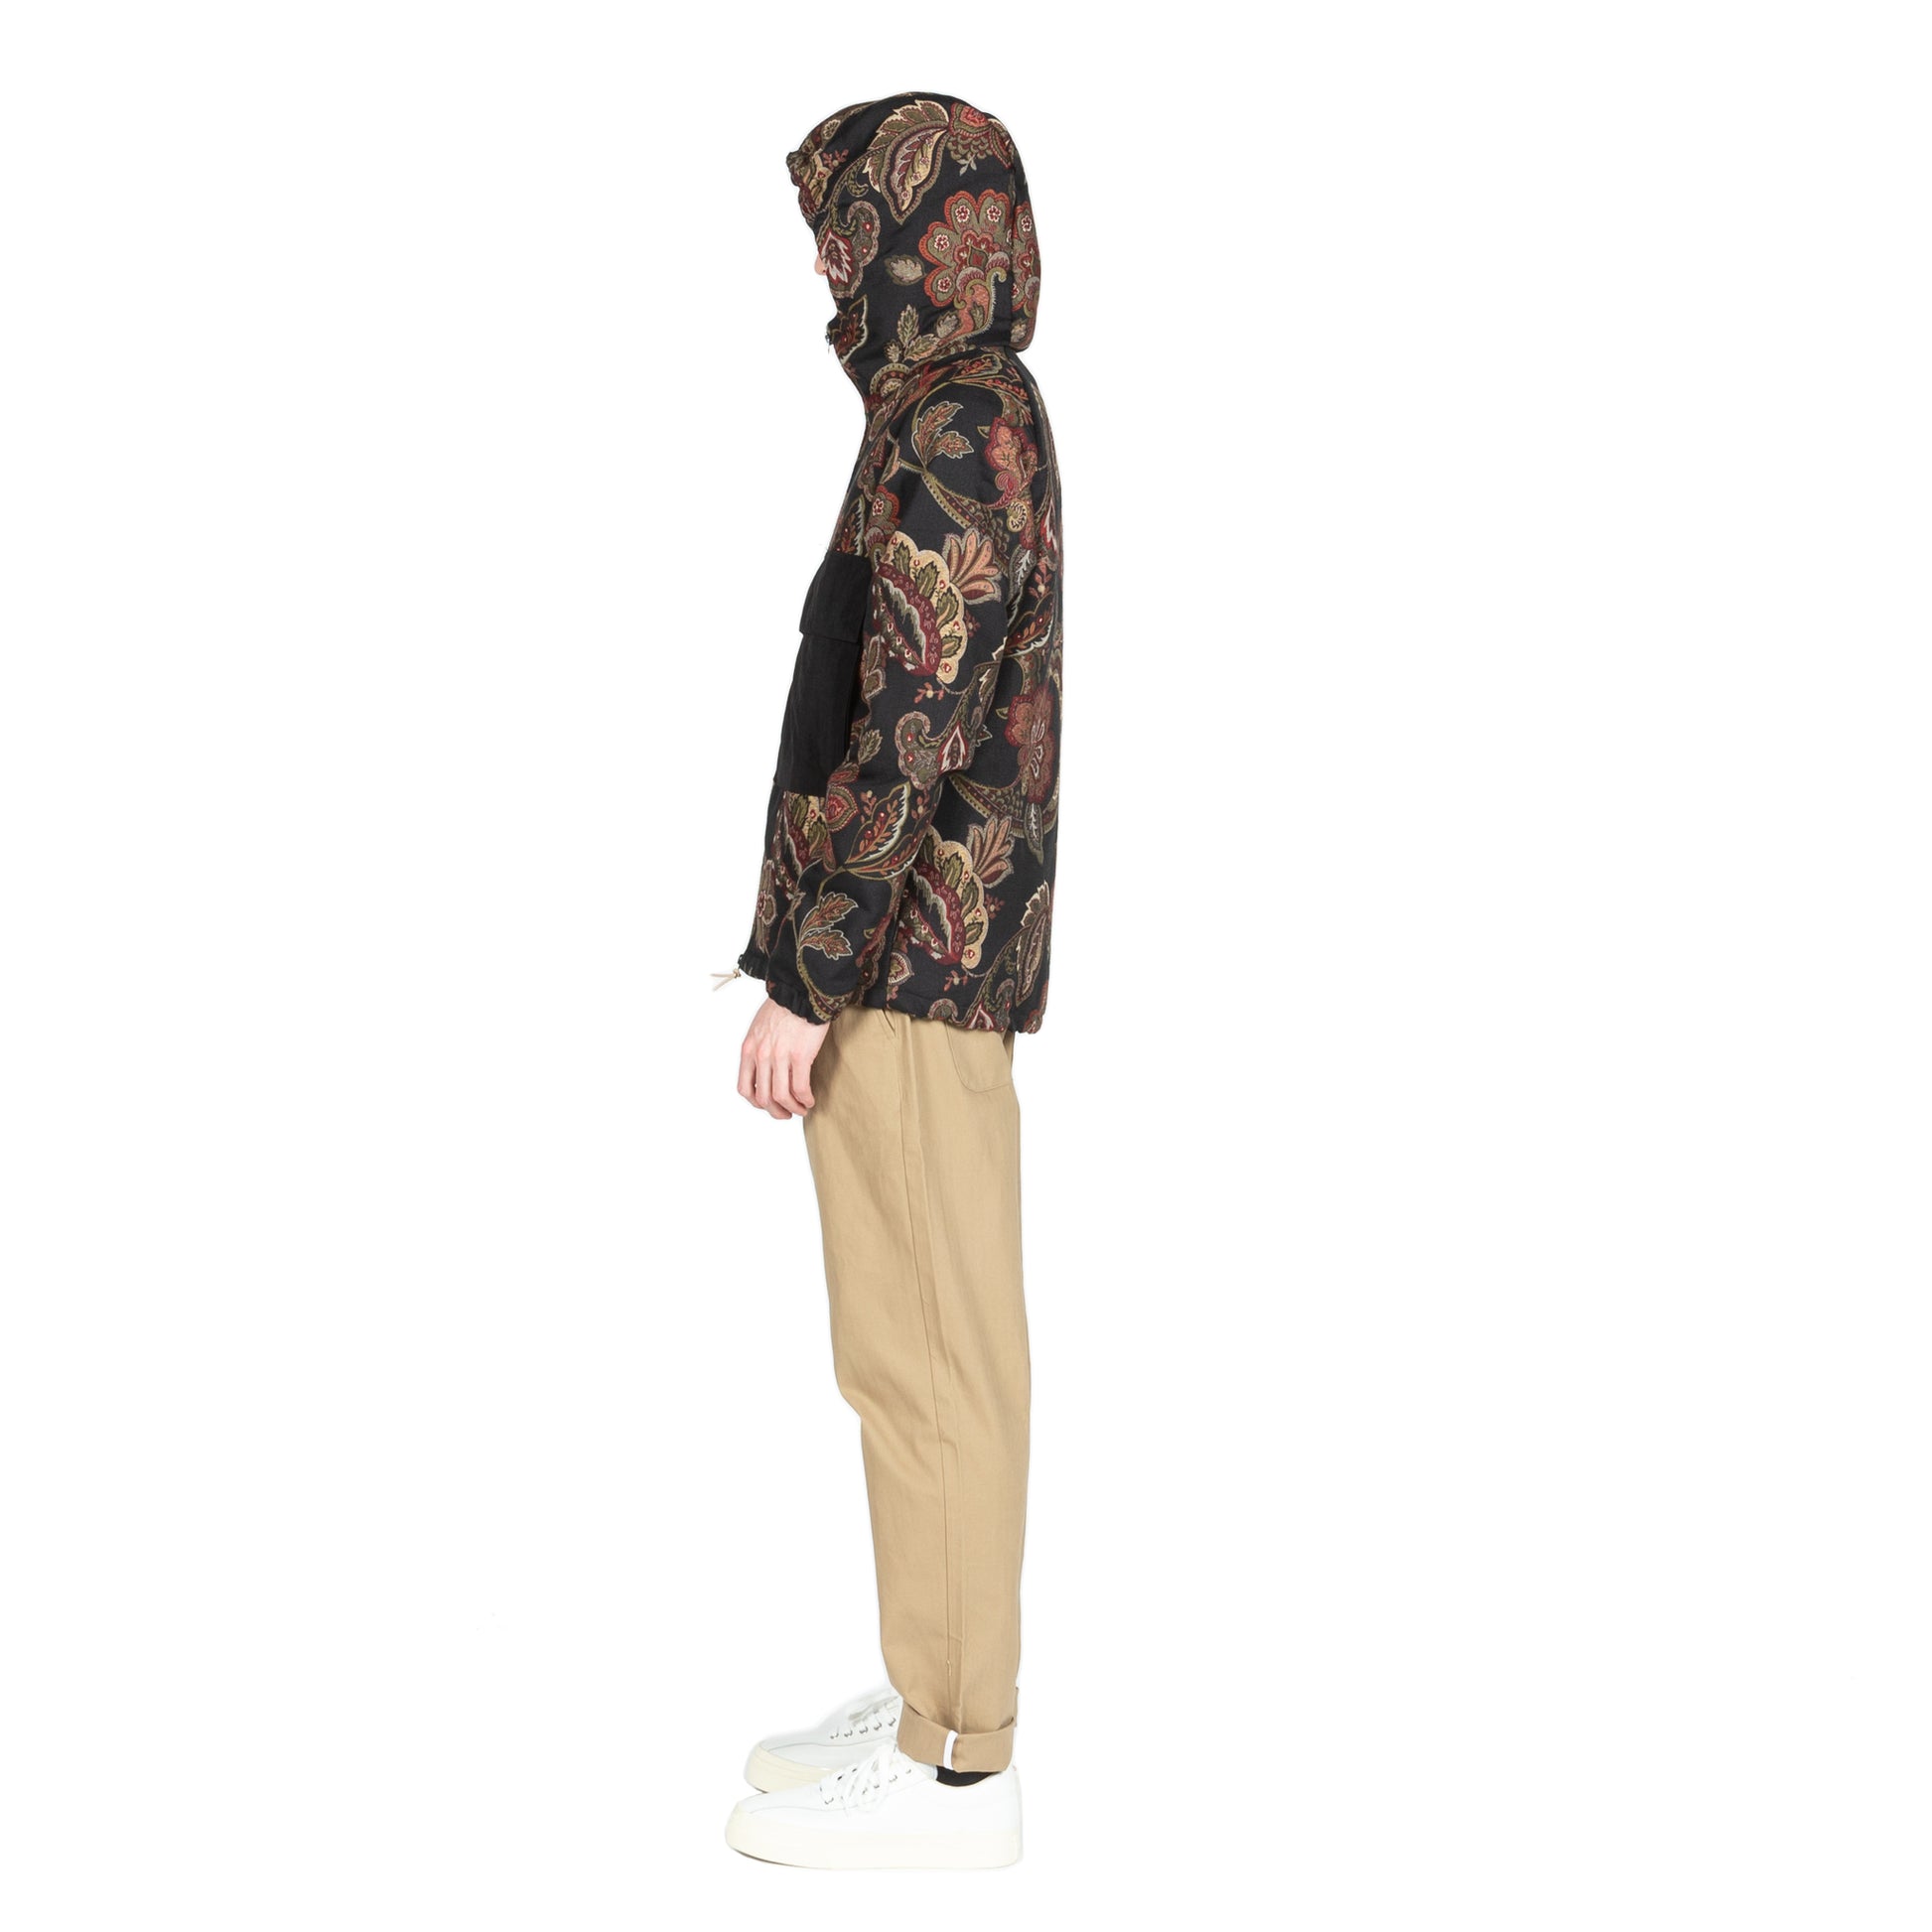 Native North Orchid Jacquard Hood Jacket Outerwear Hoodie Navy Floral